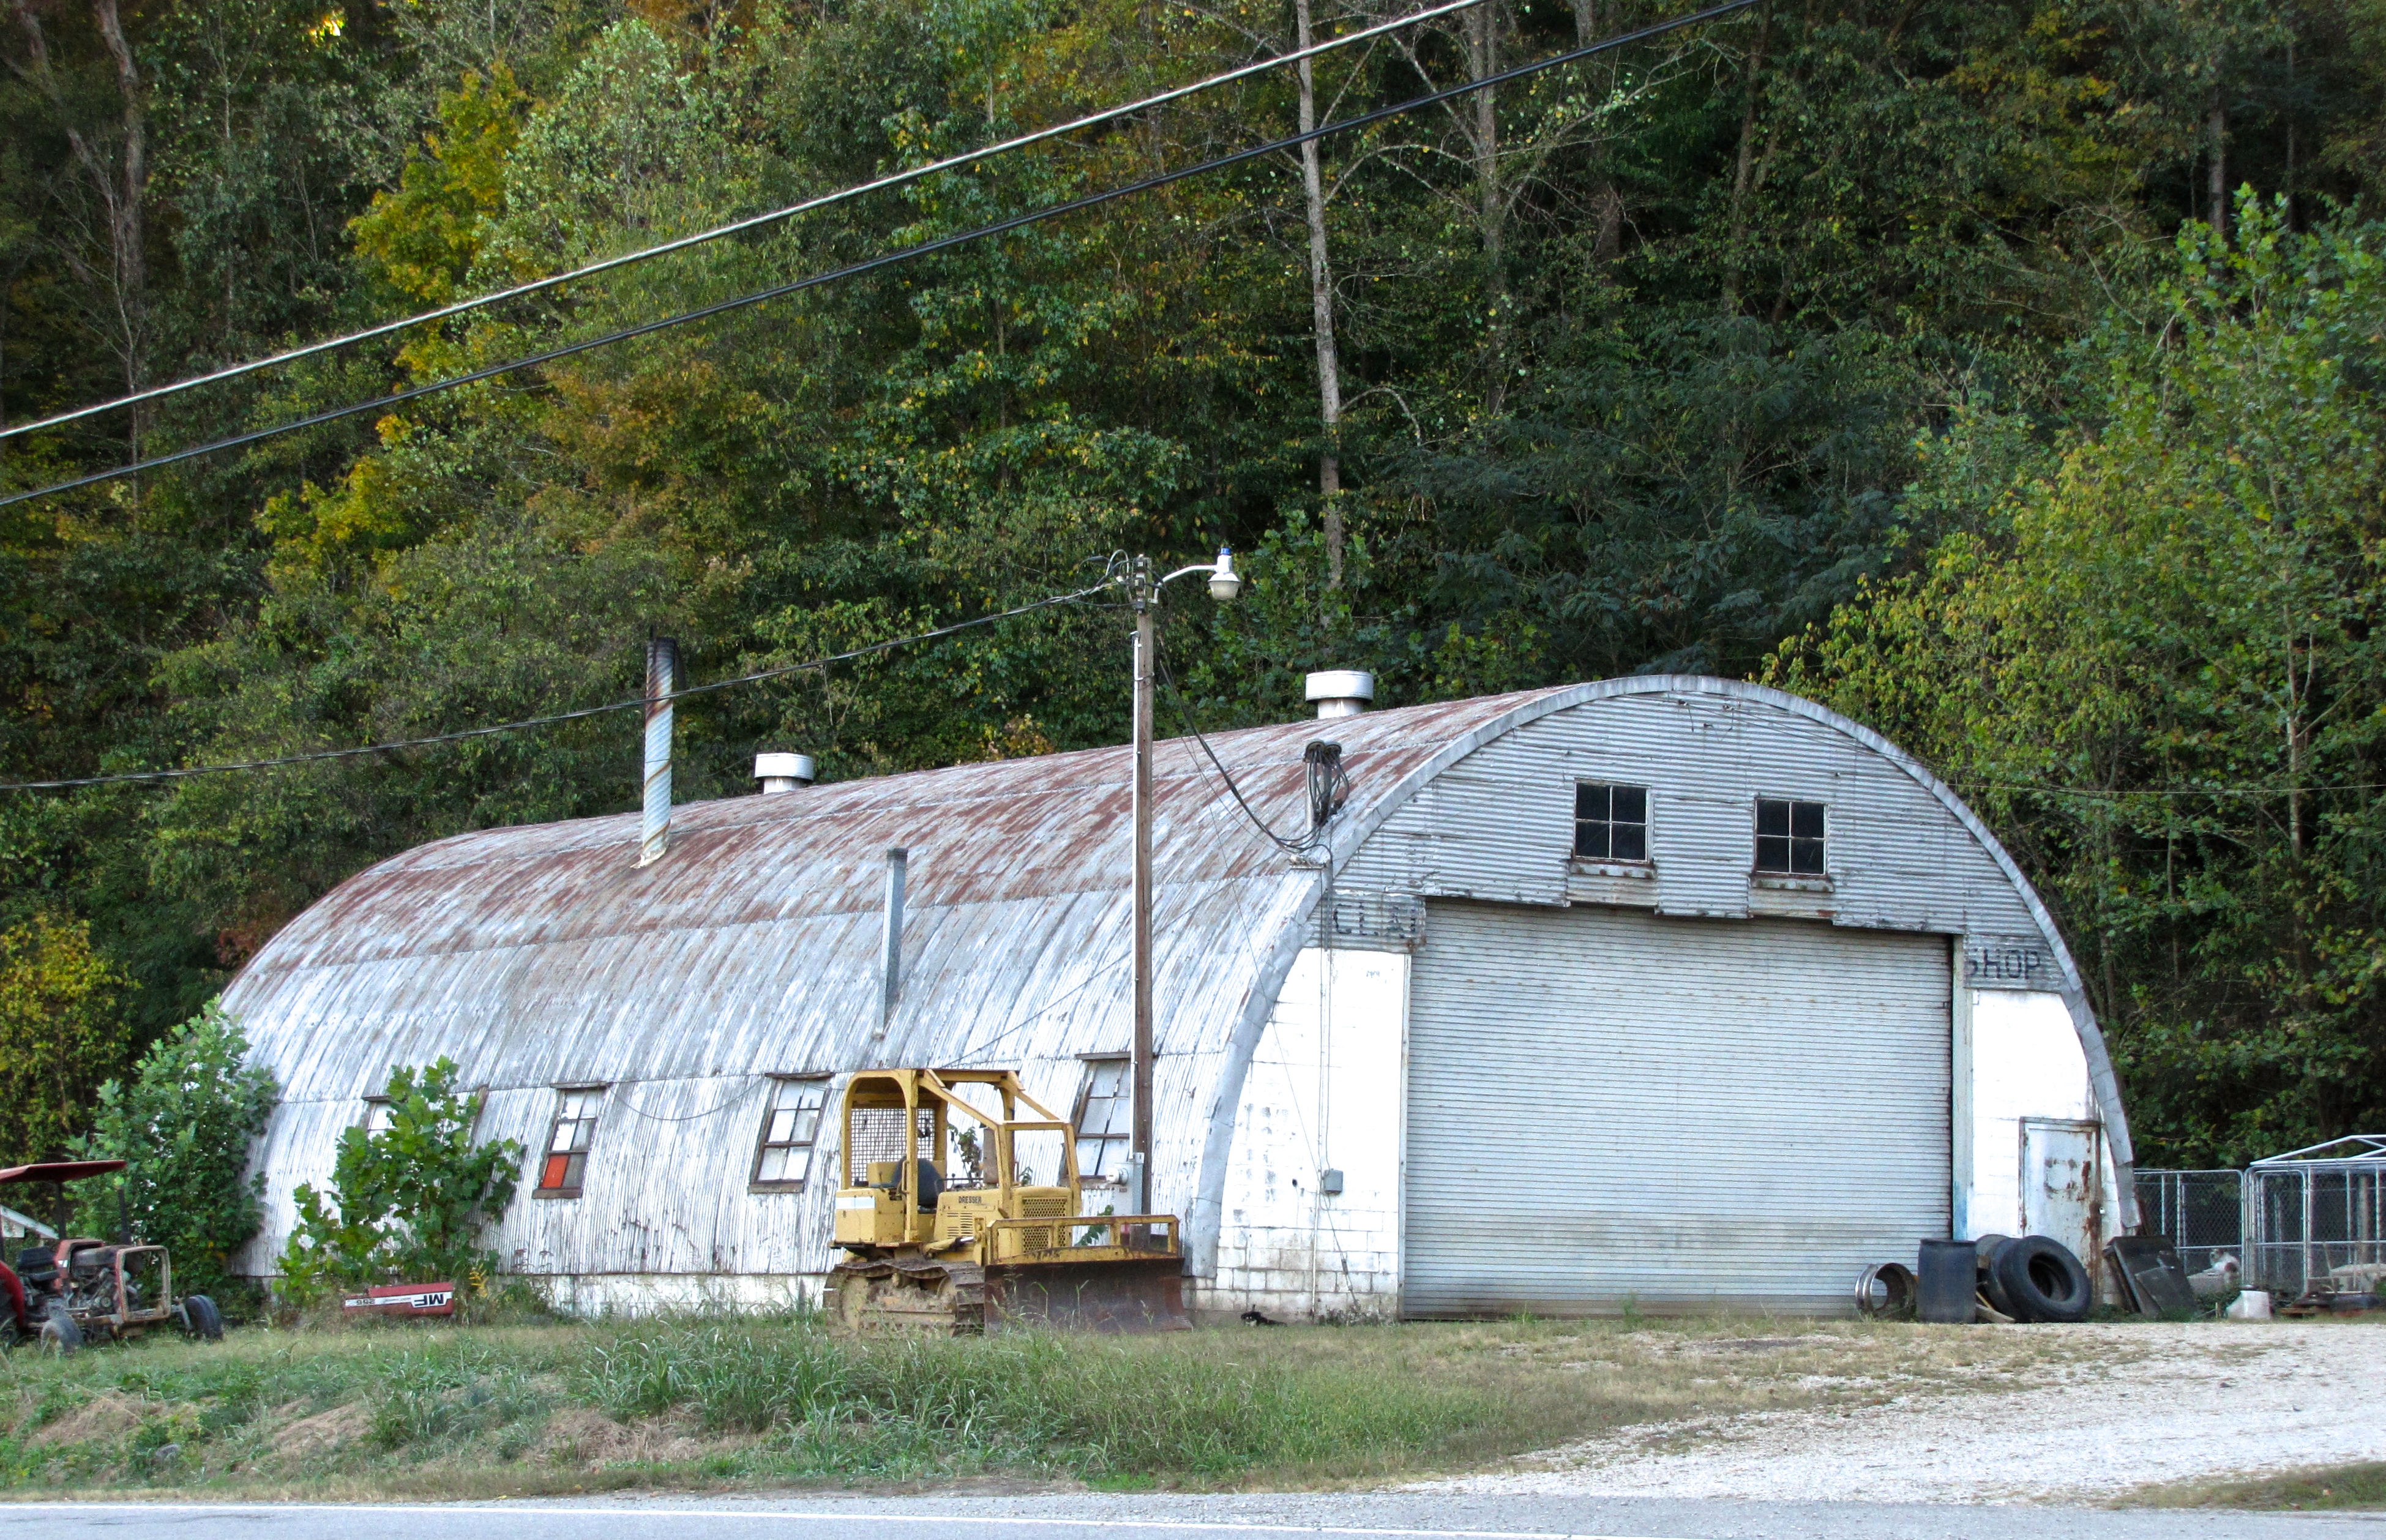 quonset hut in Milwaukie, OR